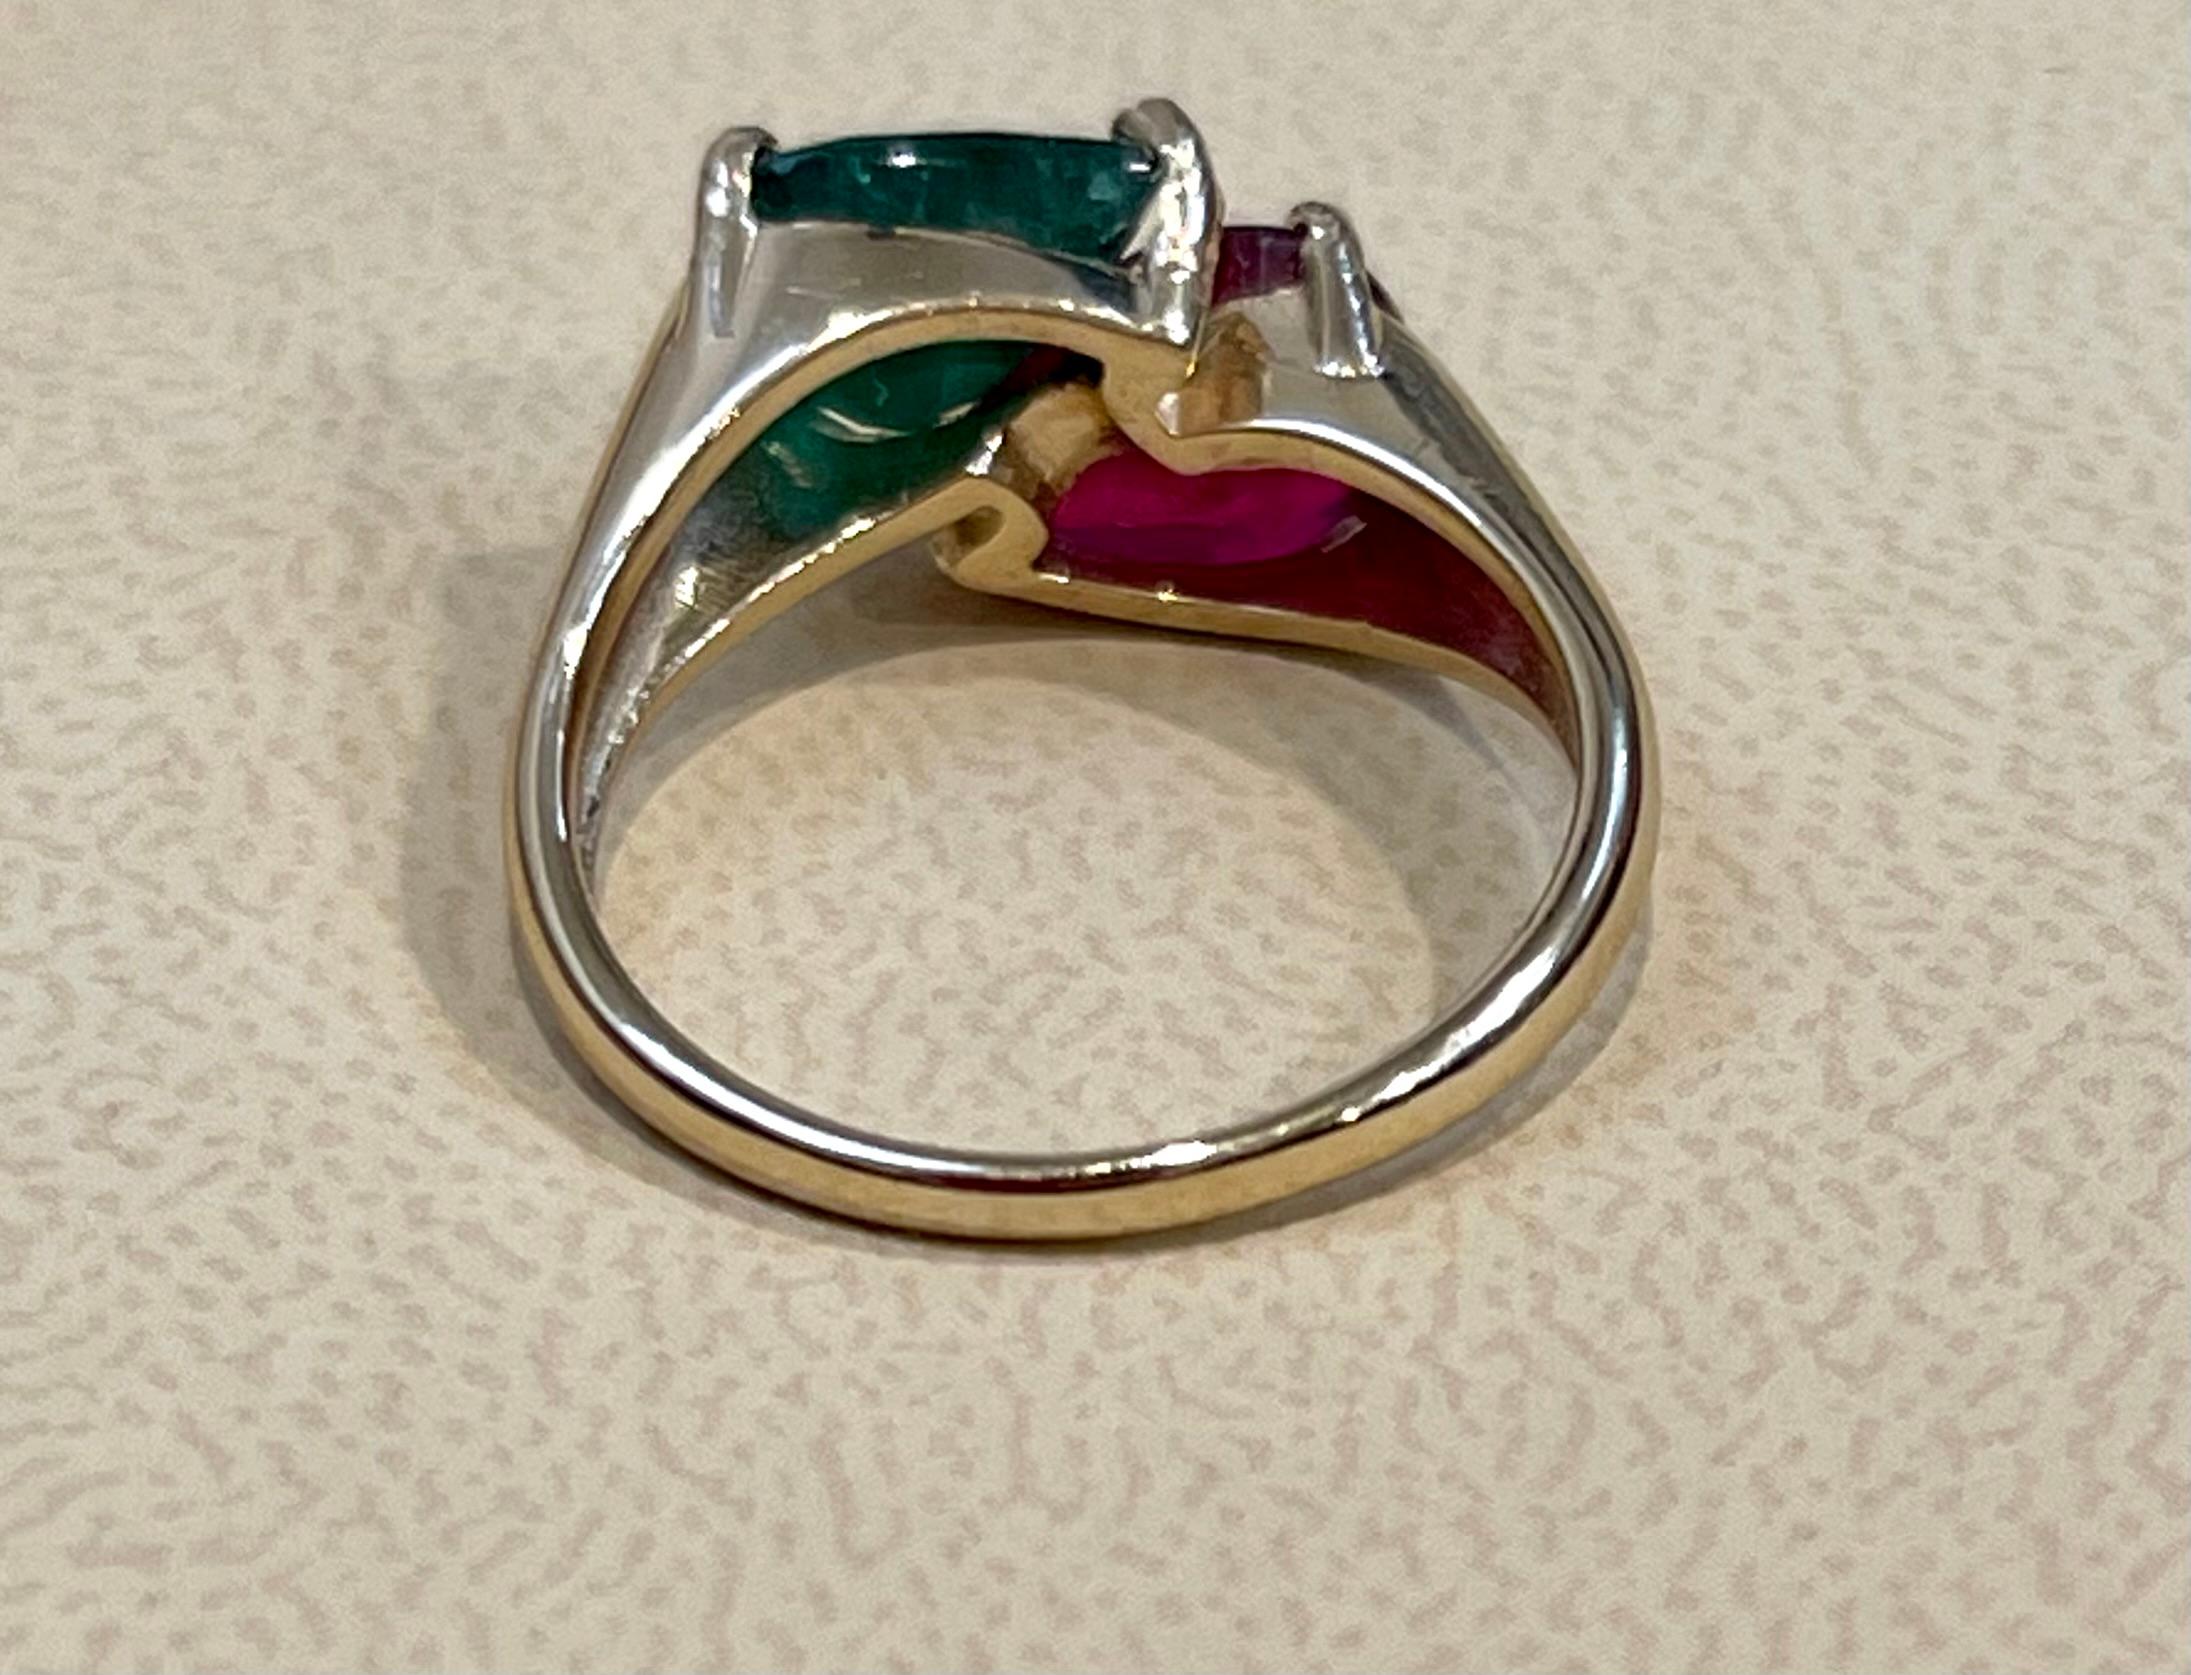 Emerald Cut Pear Shape Emerald and Ruby Engagement Ring in 14 Karat Gold